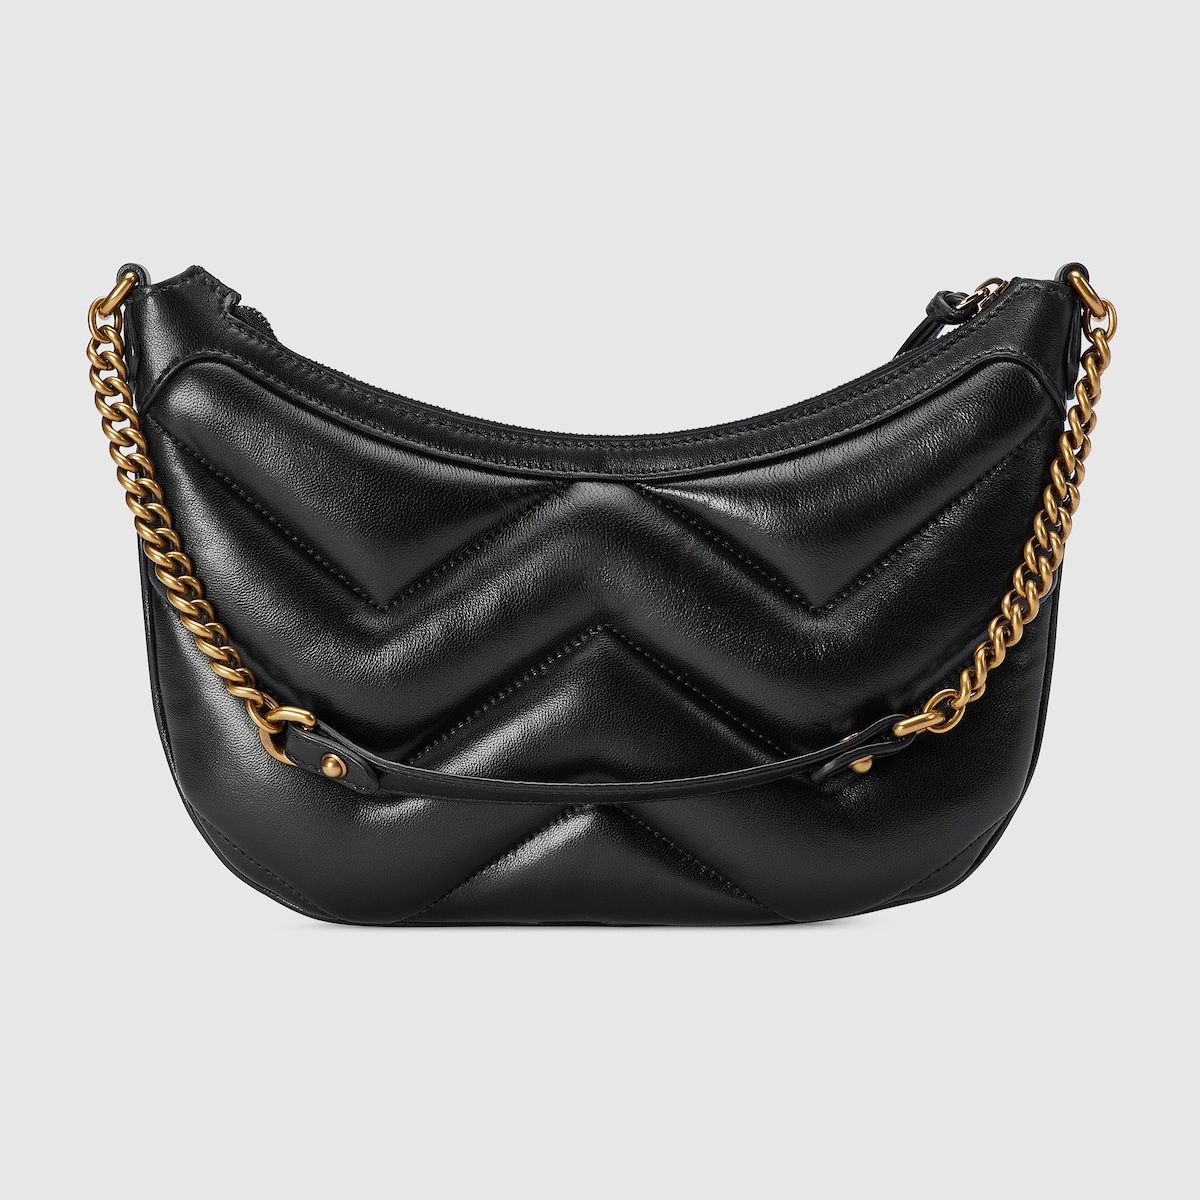 GG Marmont small shoulder bag - 6